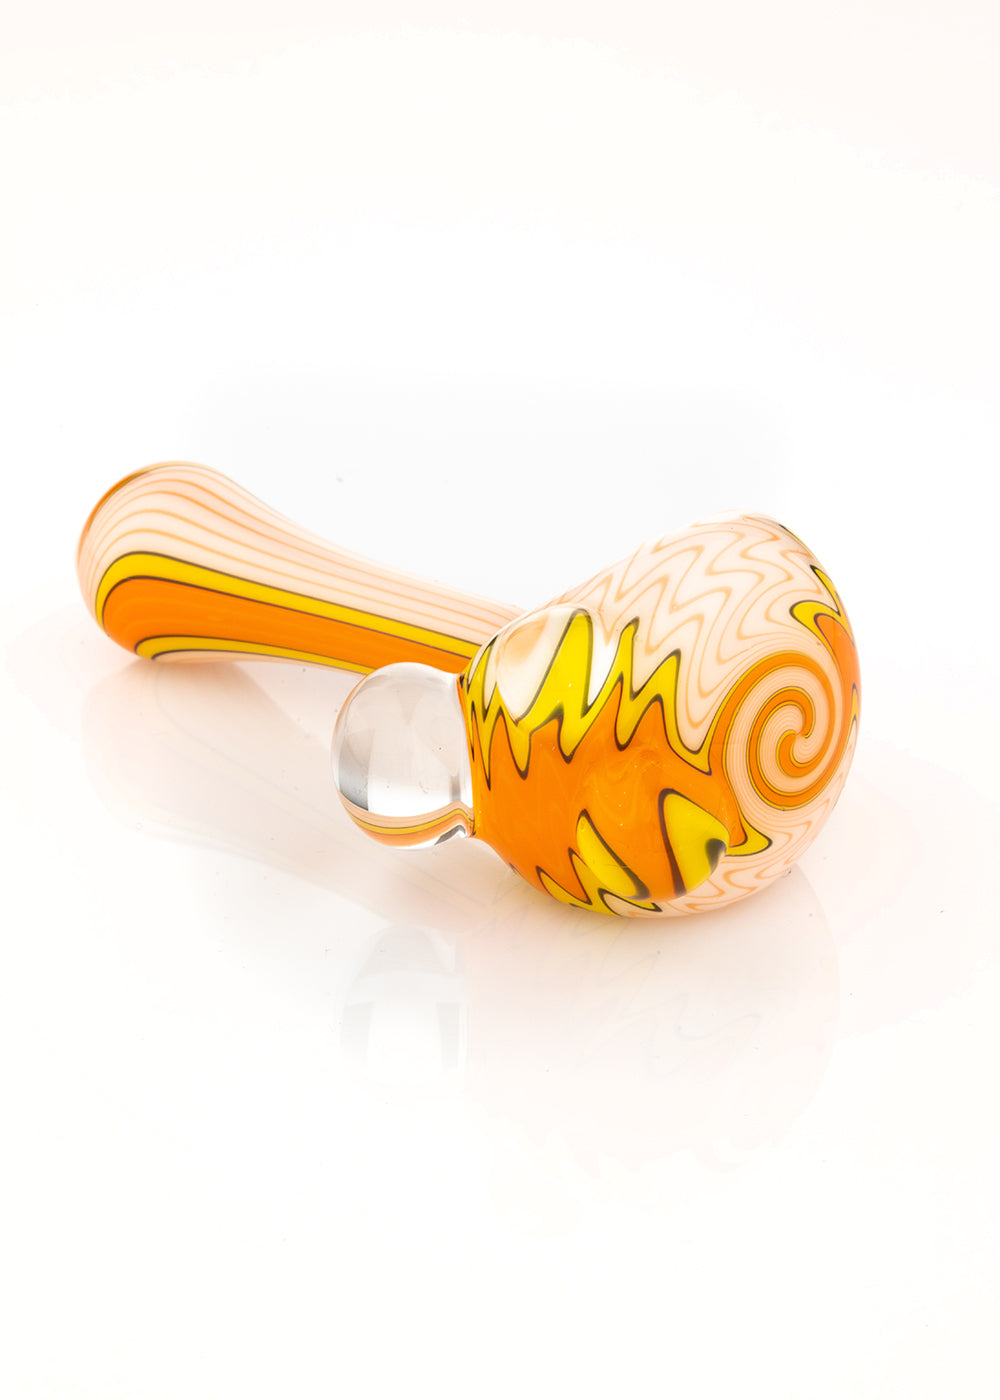 White and Orange Line Work Spoon by Sand